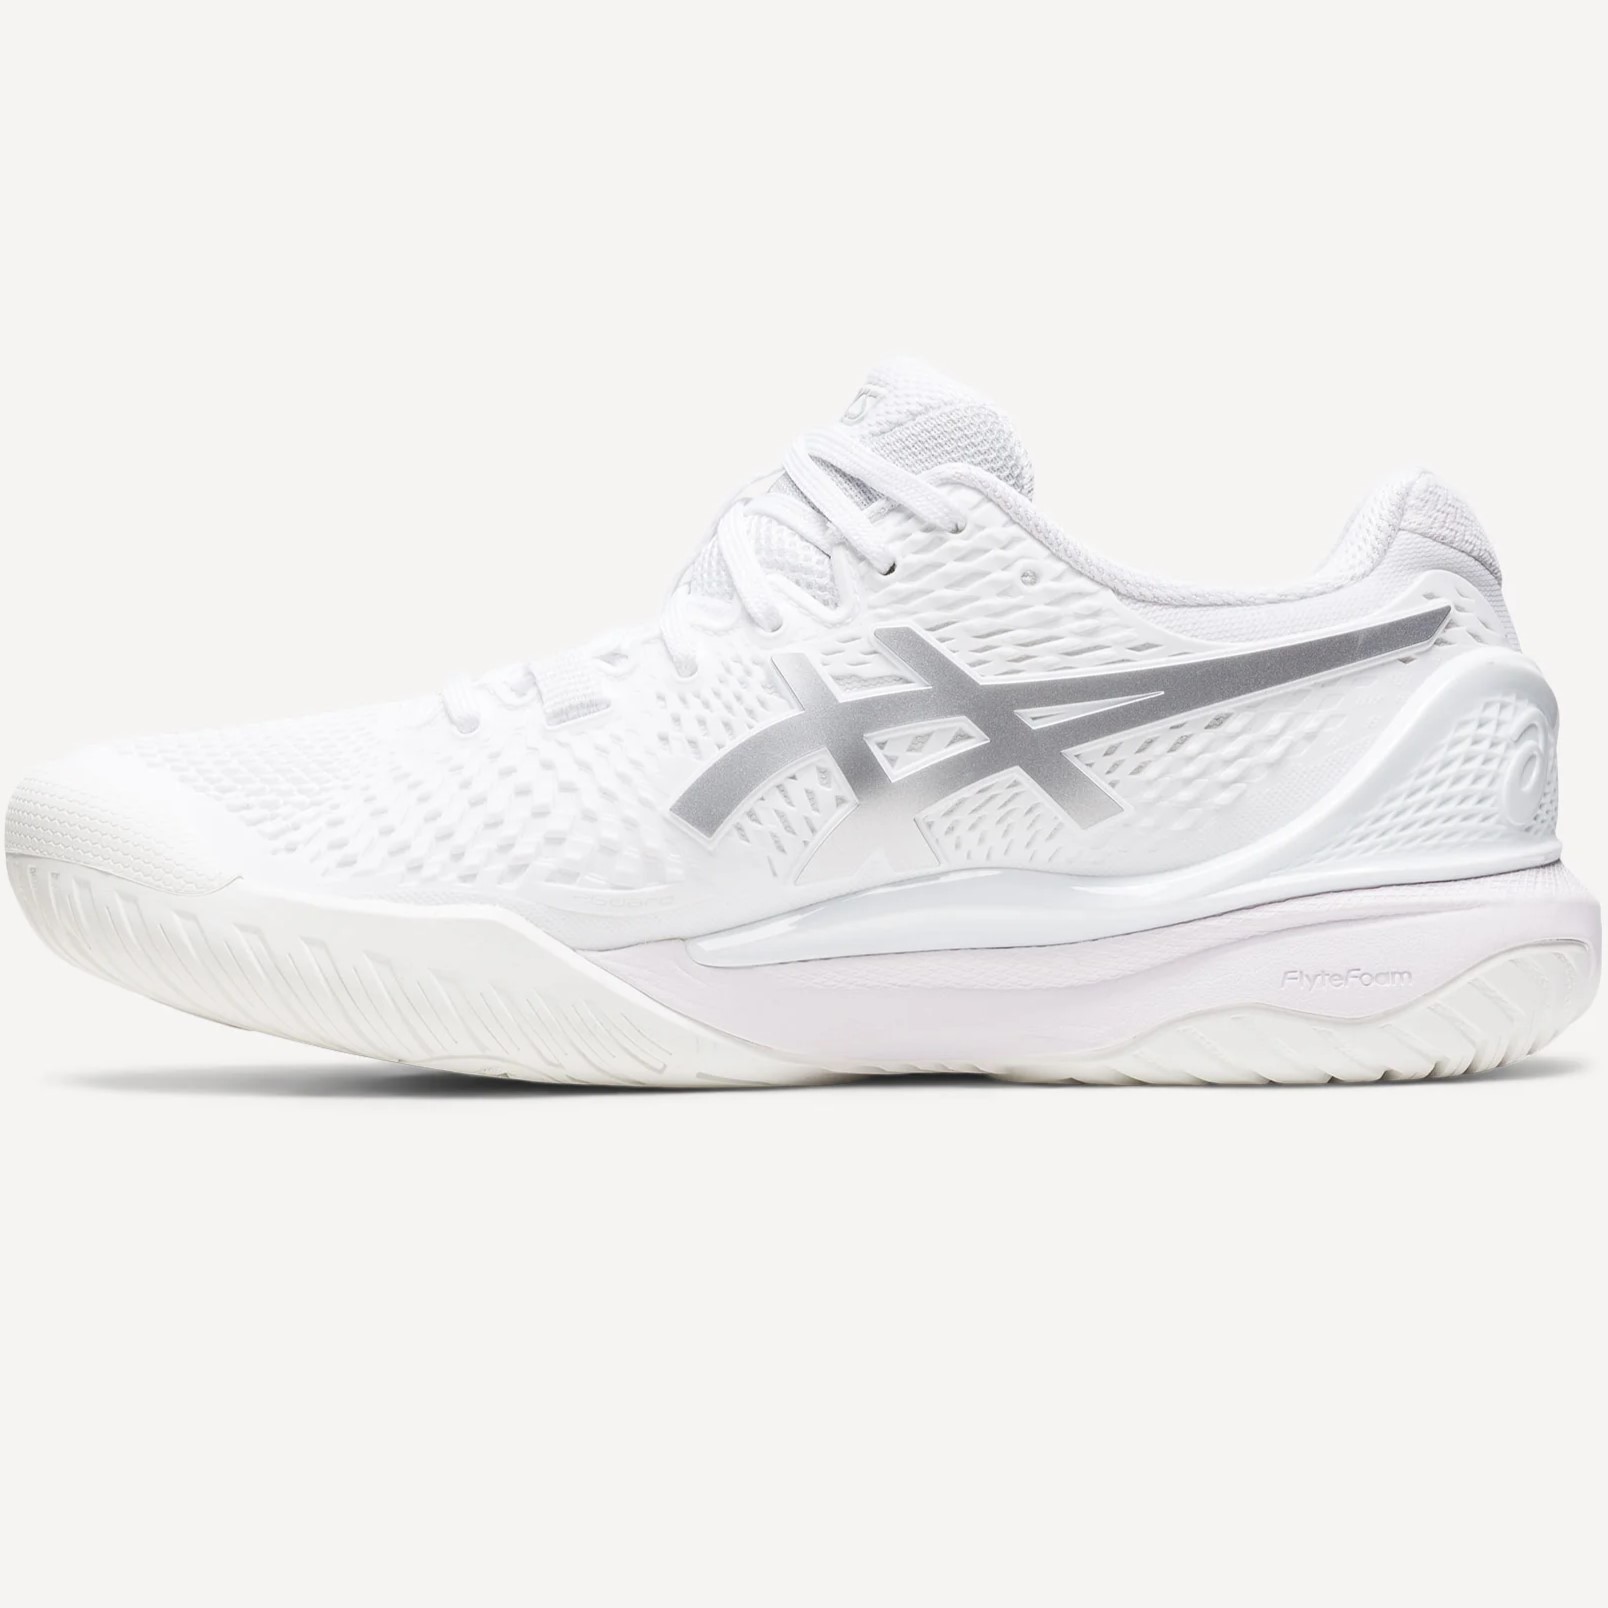 GIÀY CHAY BỘ ASICS NỮ GEL-RESOLUTION 9 WOMENS TENNIS SHOES WHITE PURE SILVER 1042A208-100 4